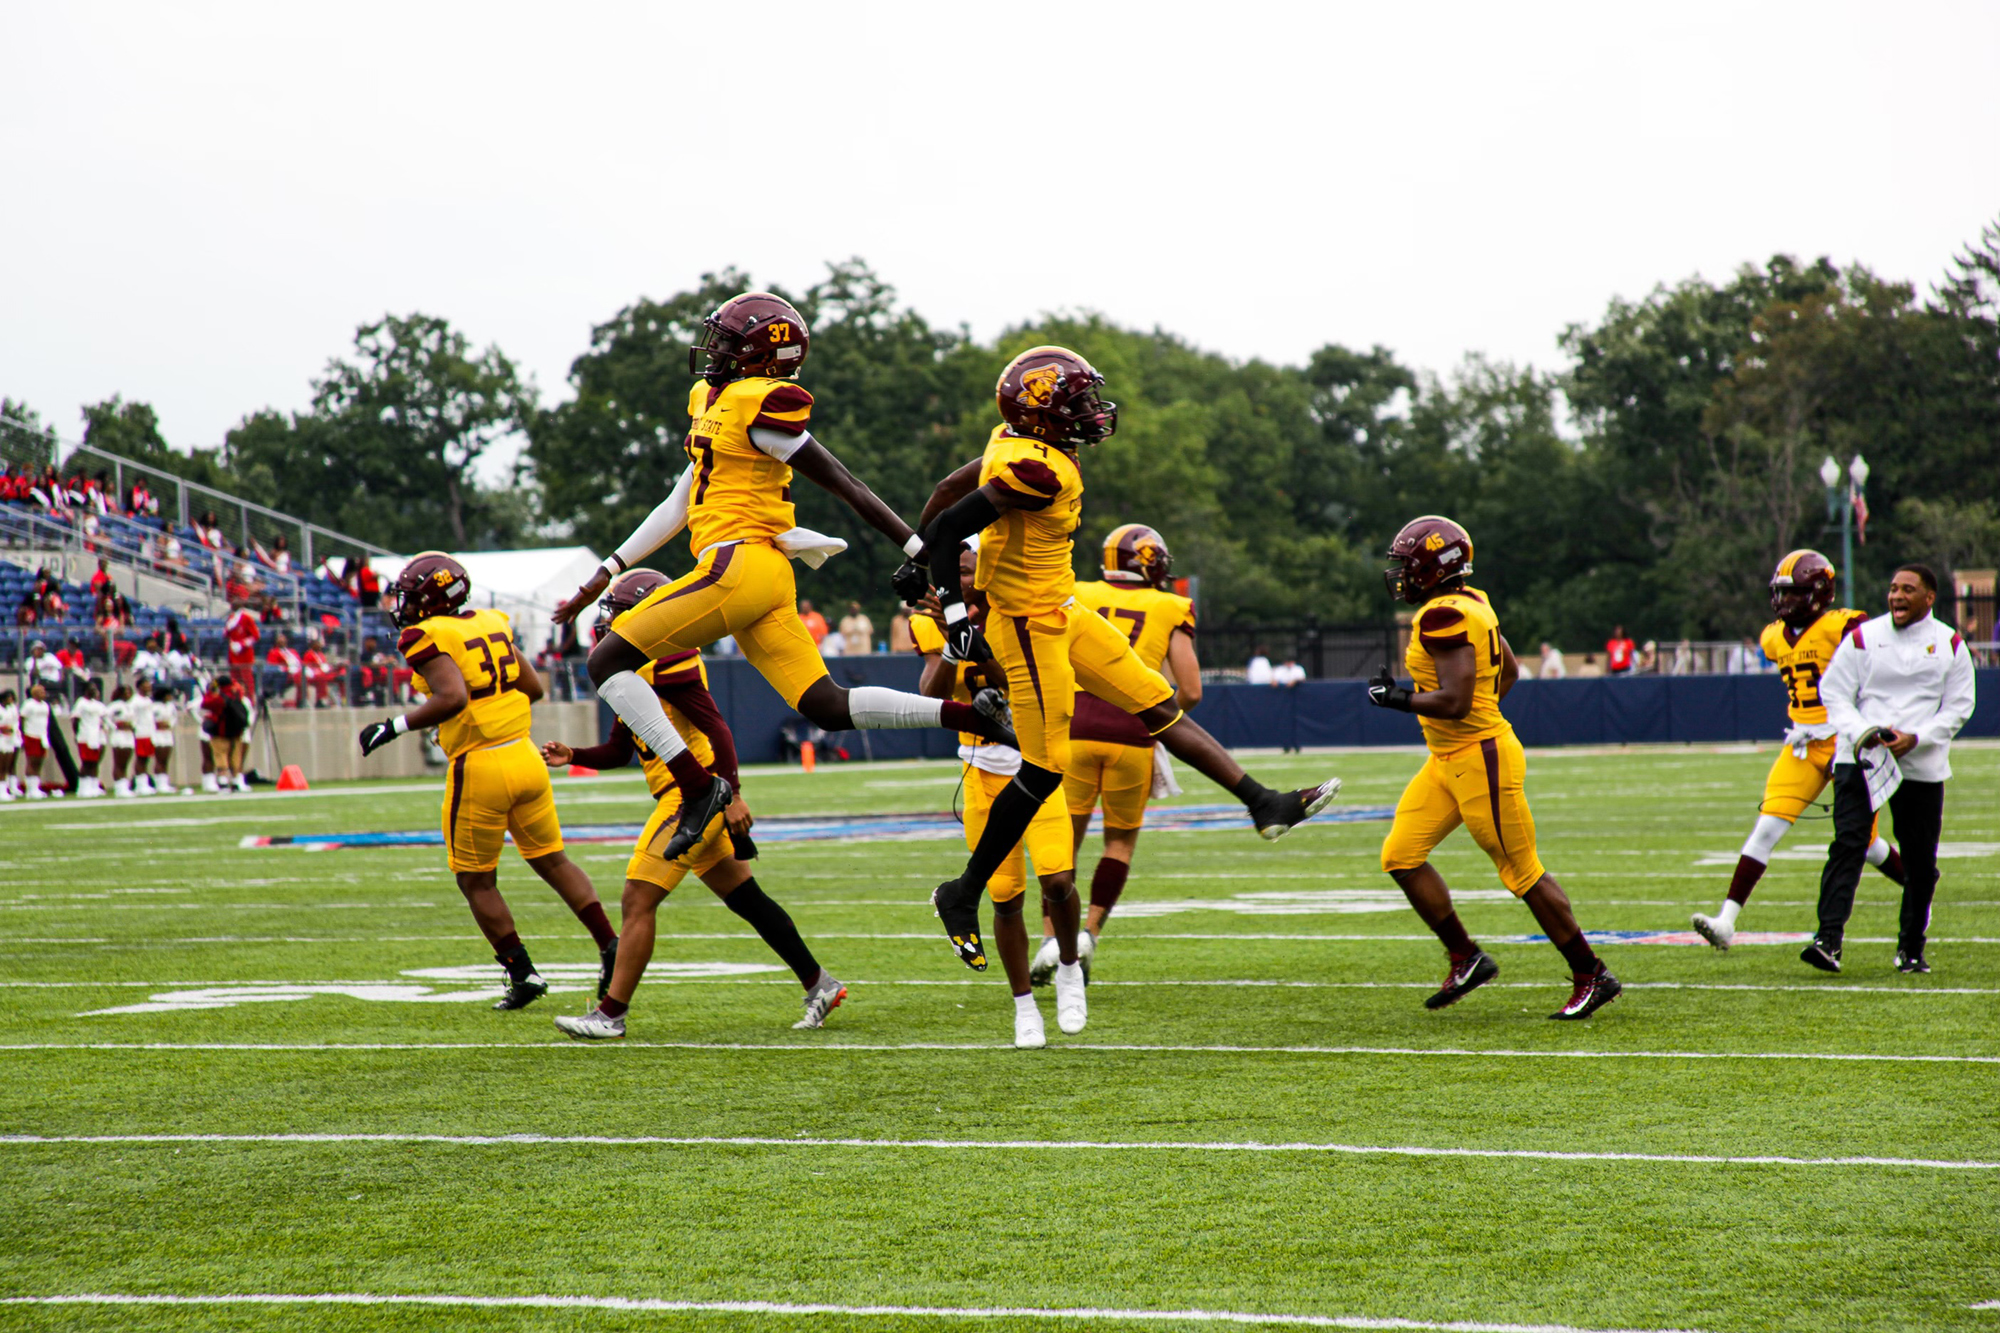 Central State University opened the season with a 41-21 victory Sunday over Winston-Salem State University in the Black College Hall of Fame Classic at Tom Benson Hall of Fame Stadium in Canton, Ohio.